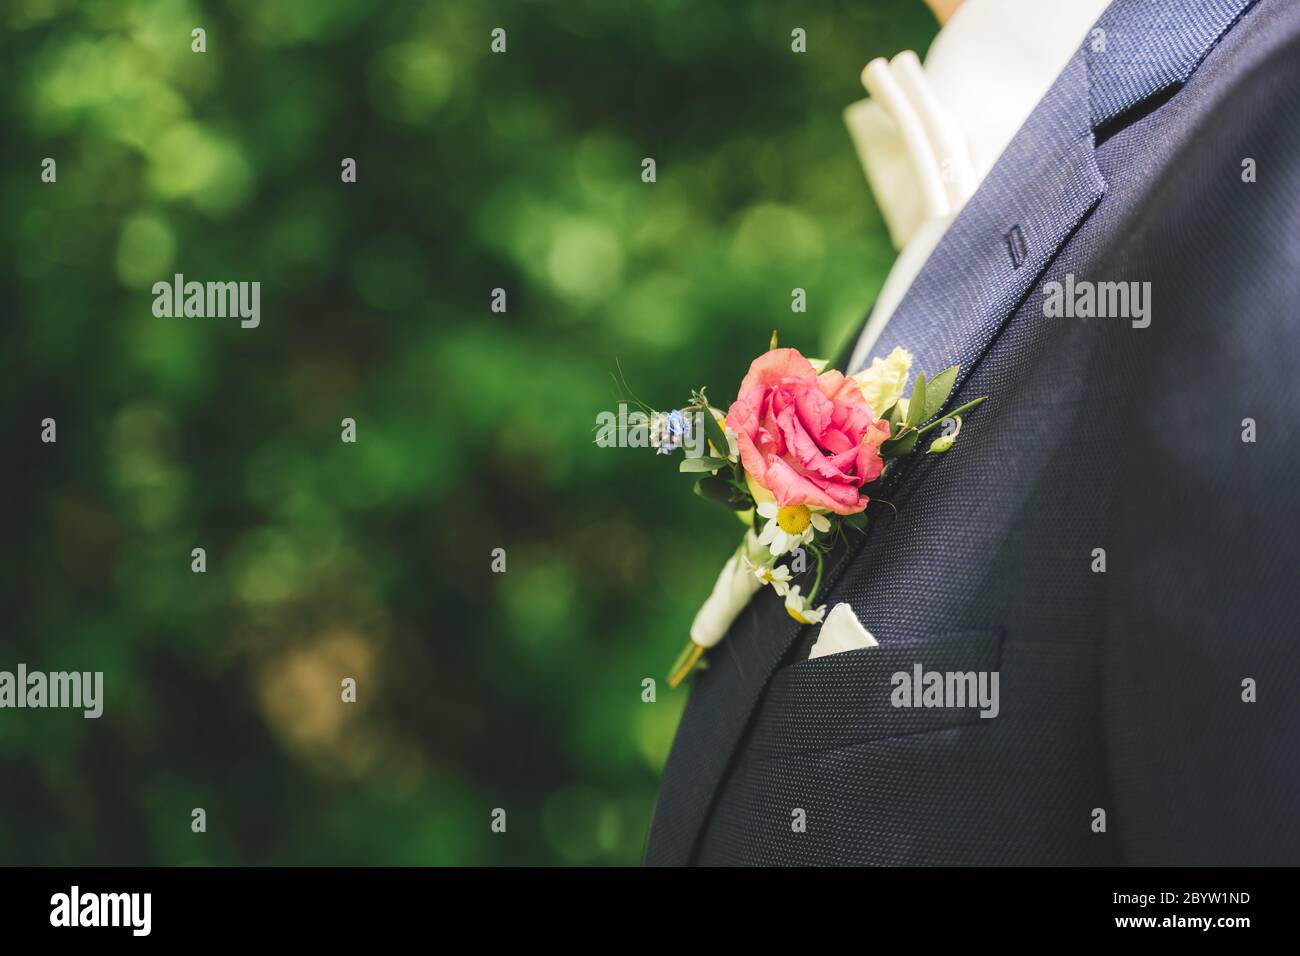 Colorful wedding boutonniere on lapel of groom's blue jacket. Side view of small posy decoration. Blurred lush green foliage background. wedding day Stock Photo